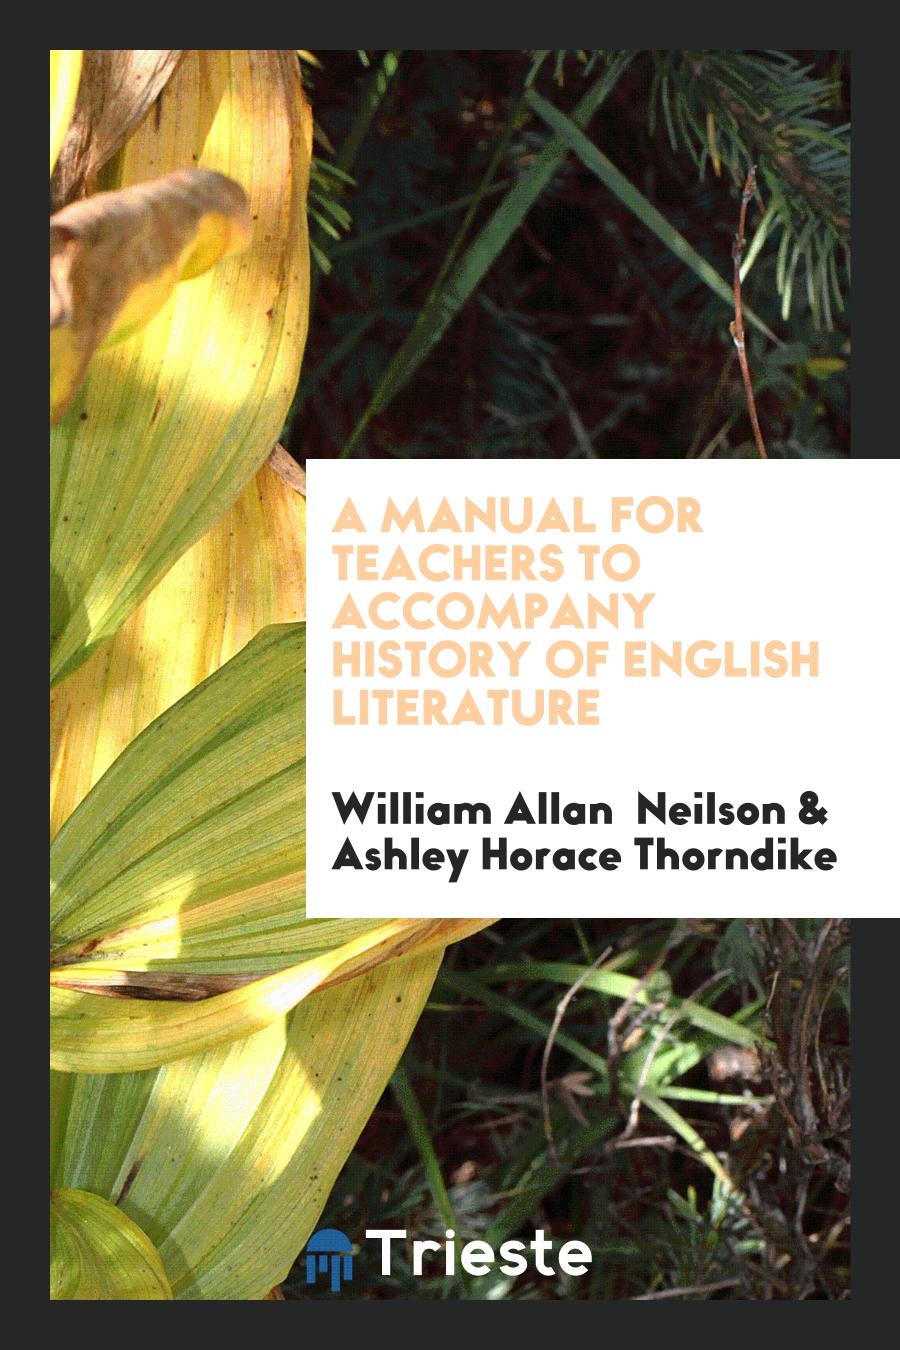 A manual for teachers to accompany History of English Literature